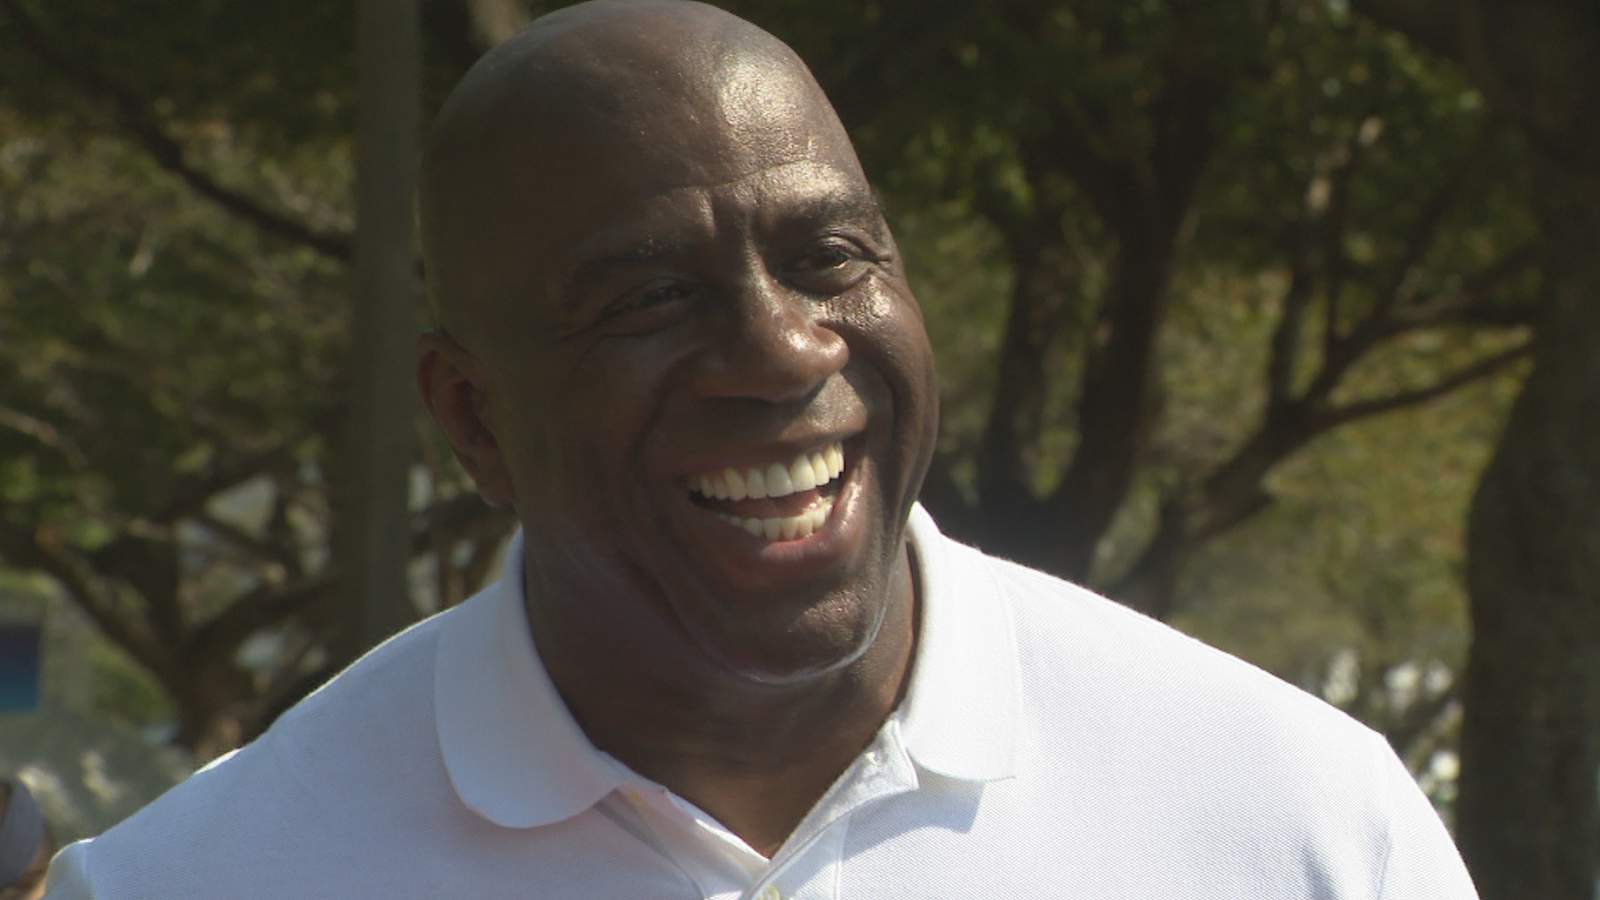 Magic Johnson says he still has the talk with his sons about interacting with police